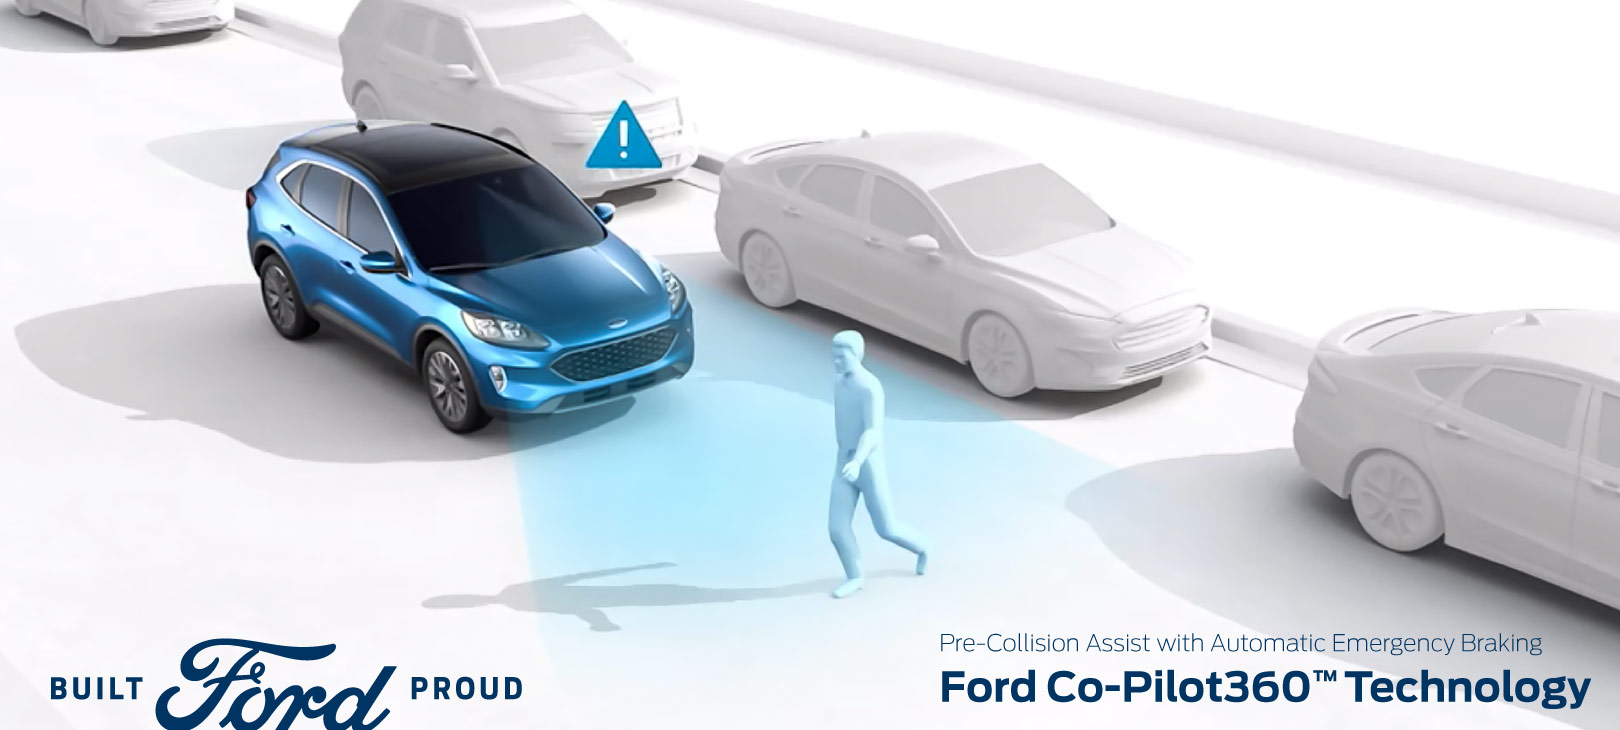 Drive Confidently with Ford’s Co-Pilot 360™ Technology